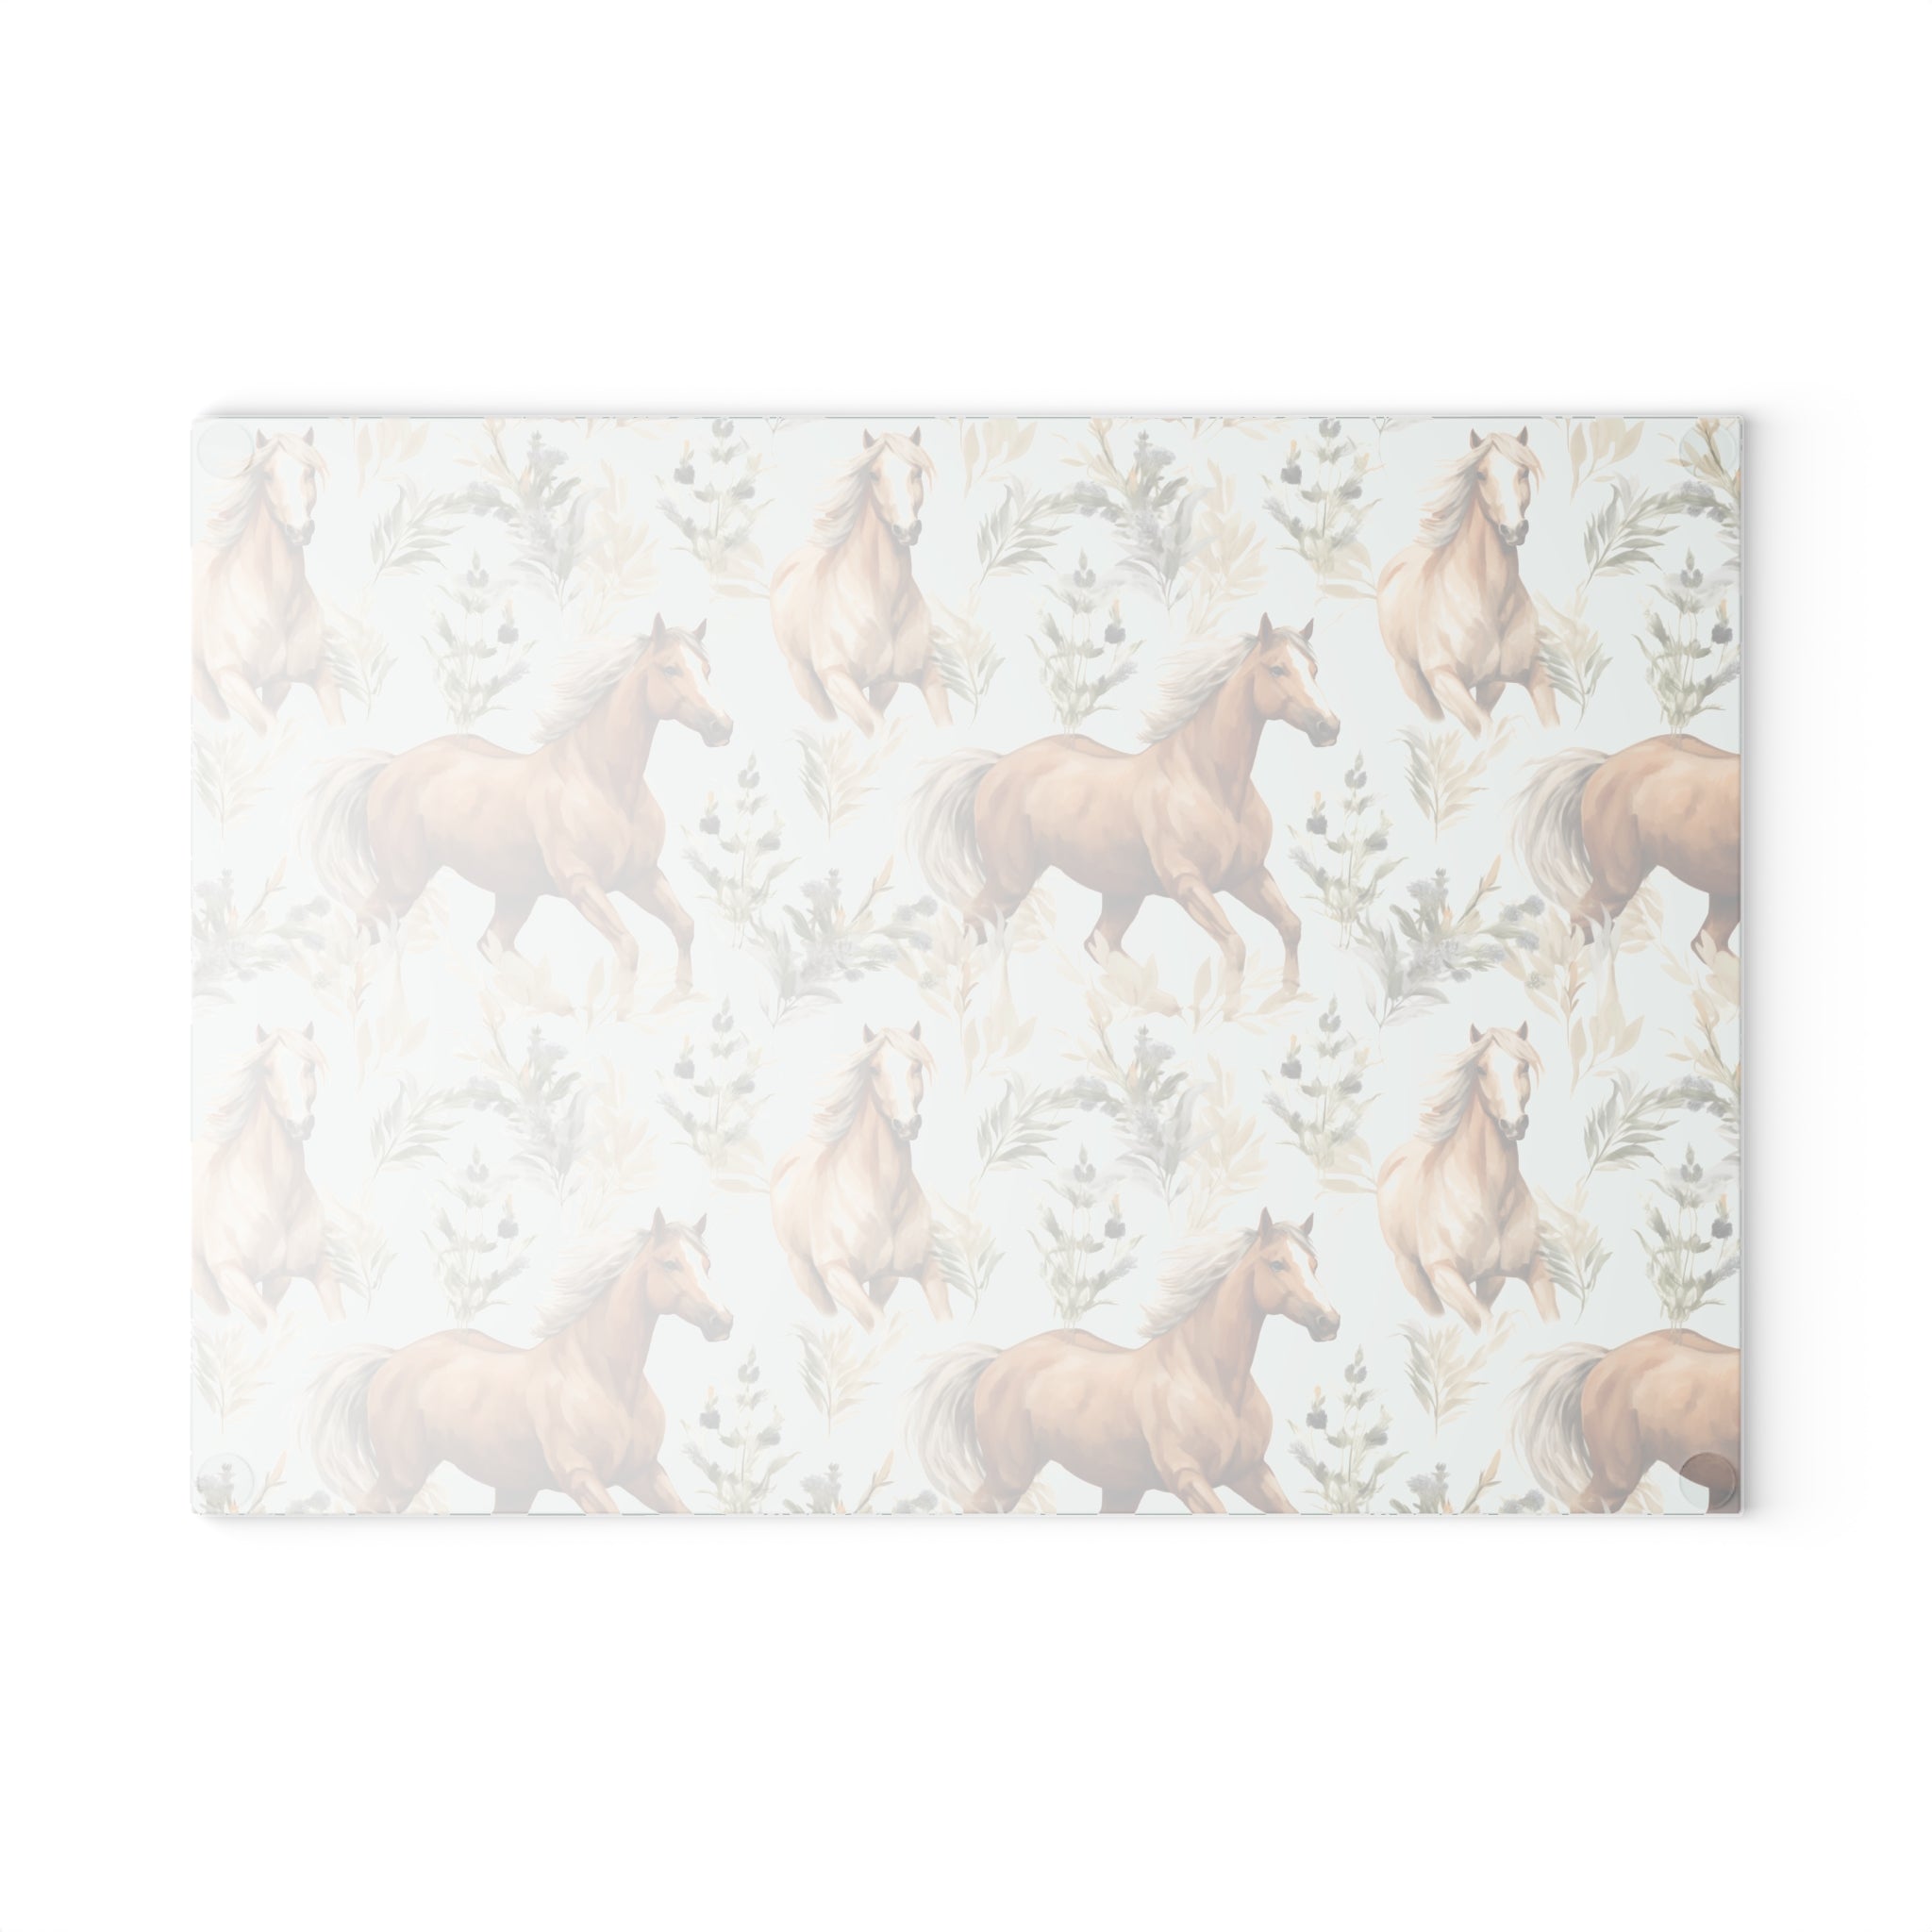 Country Rustic Horse Glass Cutting Board - Kitchen Home Decor